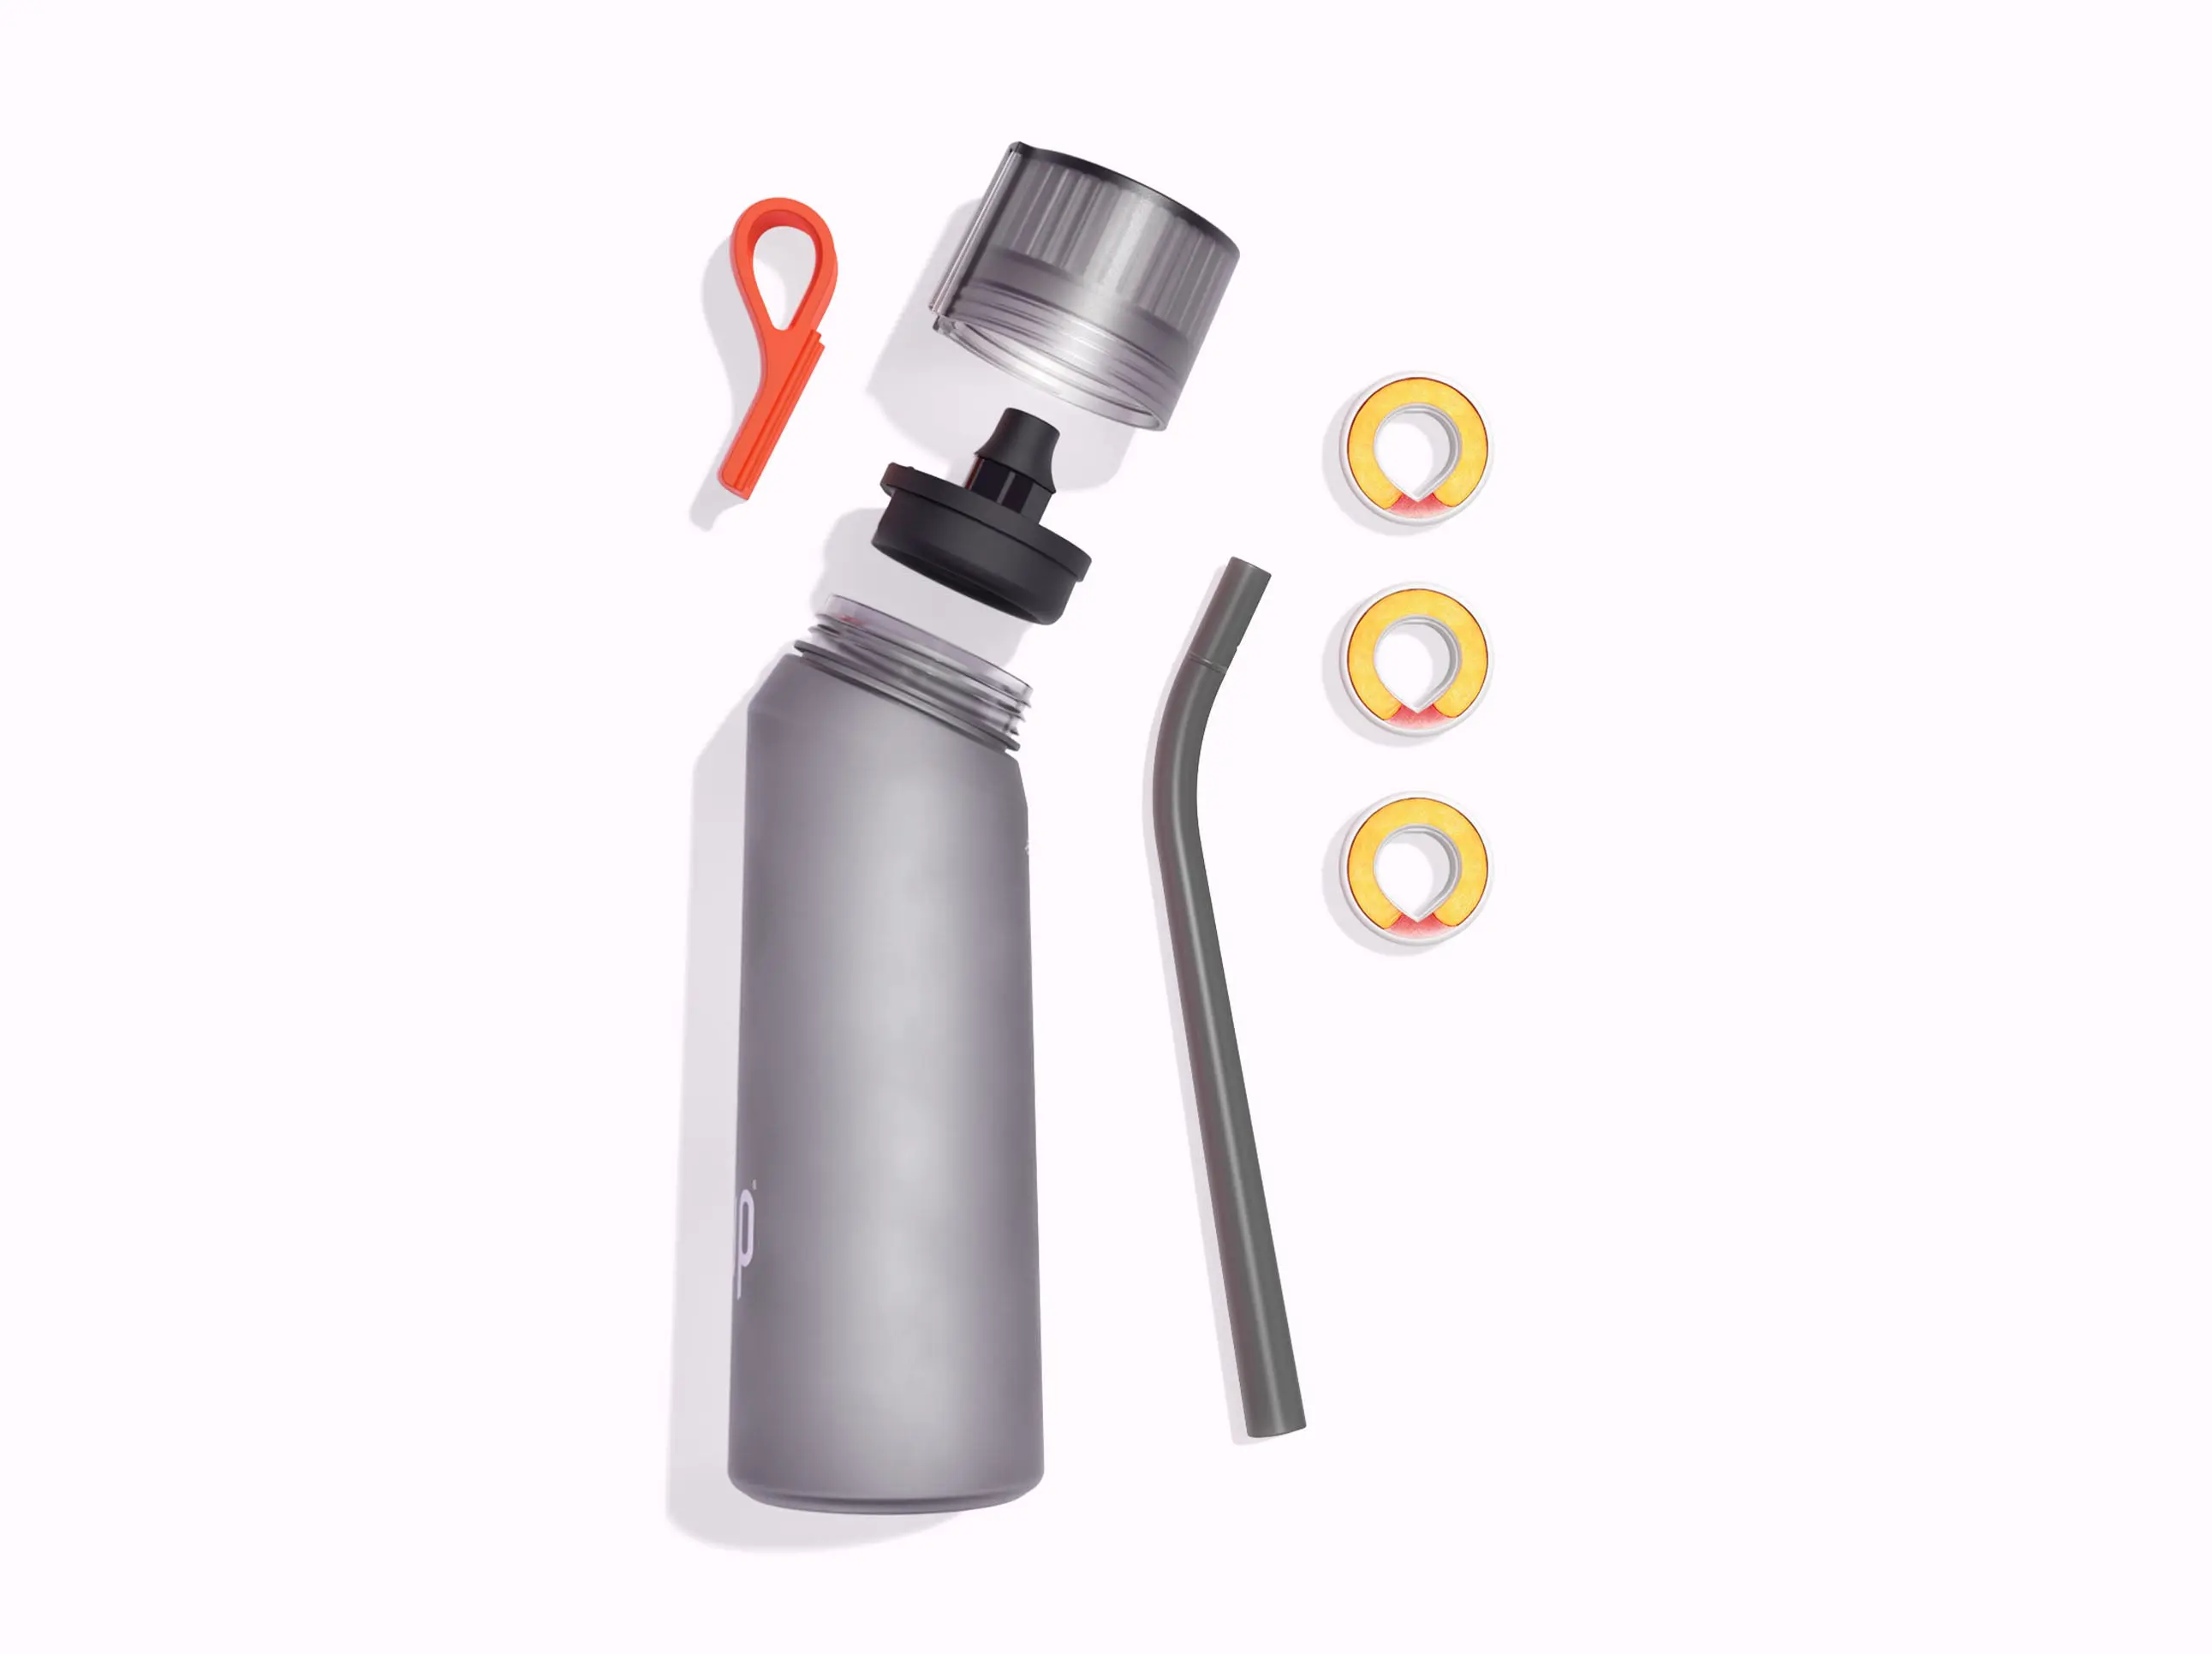 Charcoal Gray bottle + Peach pods (3-pack)